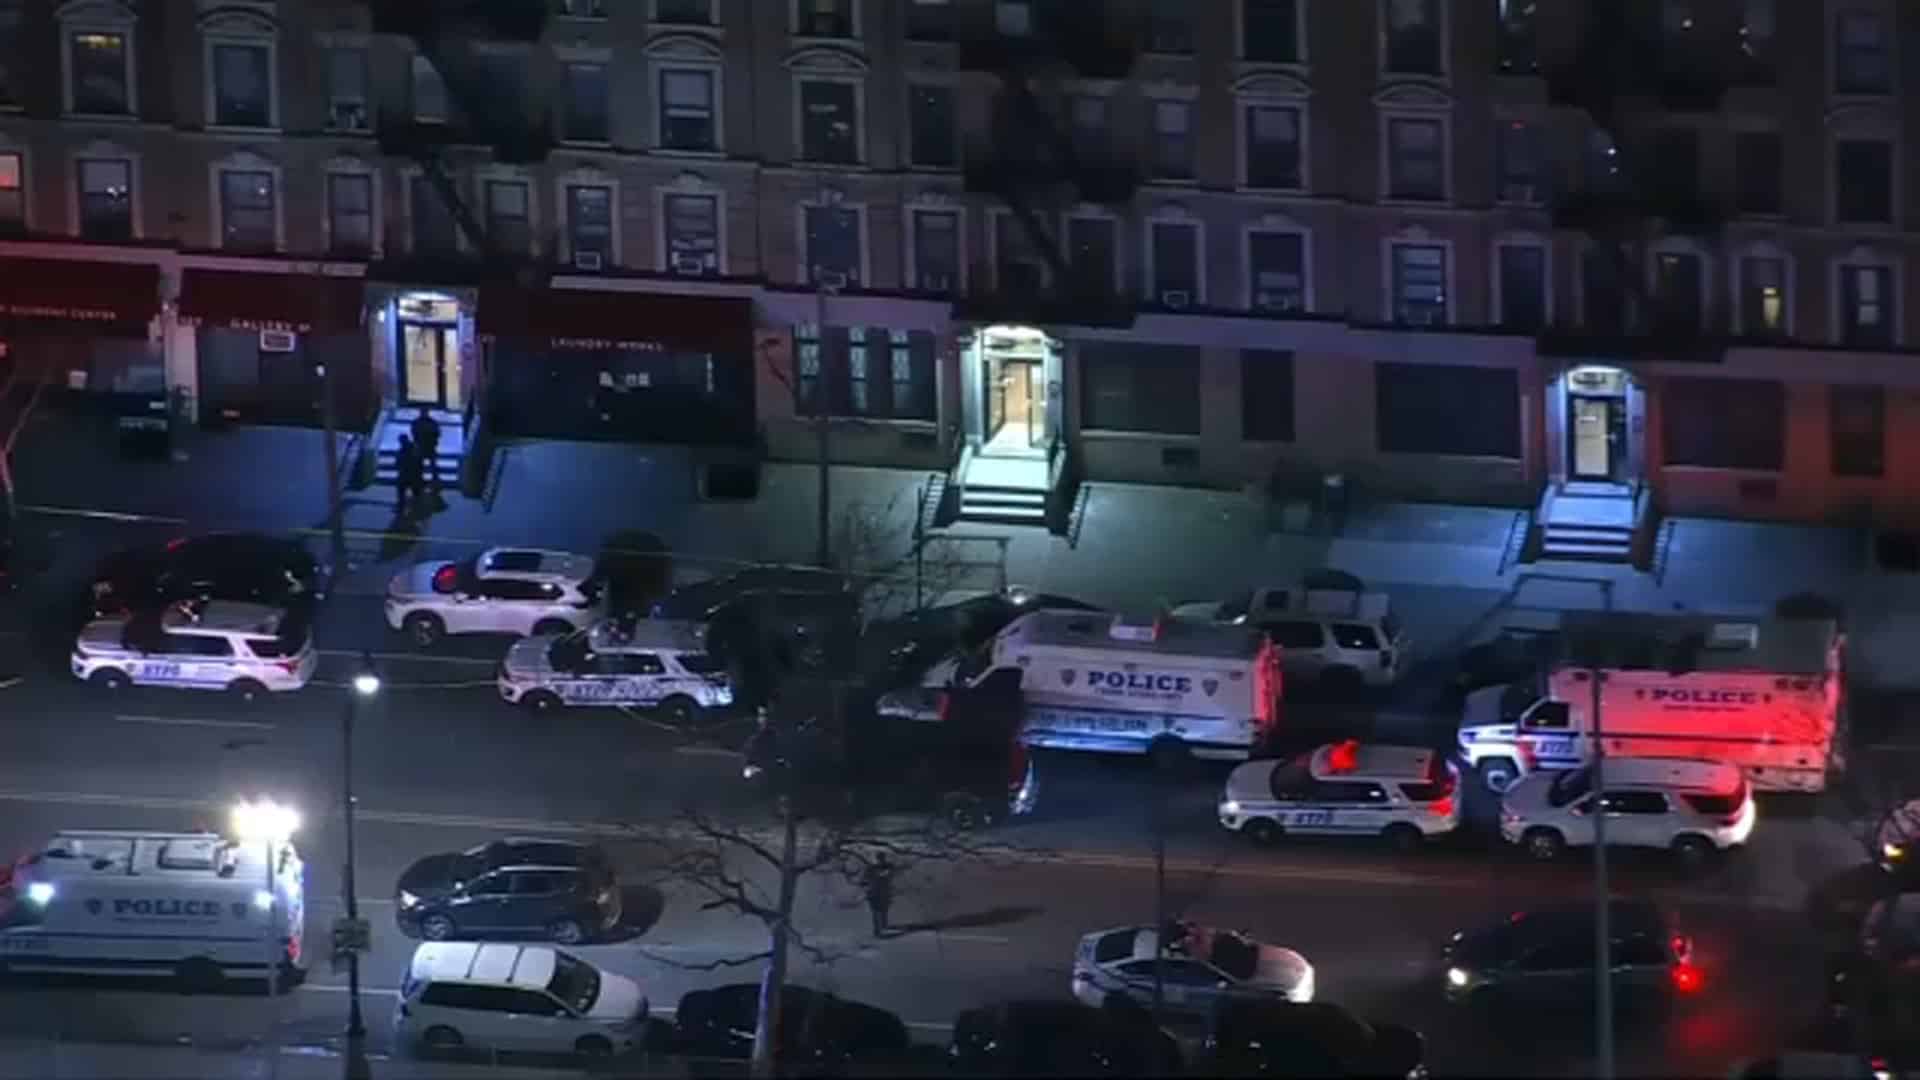 NYPD Officer Killed in a Shooting as he Responds to a Domestic